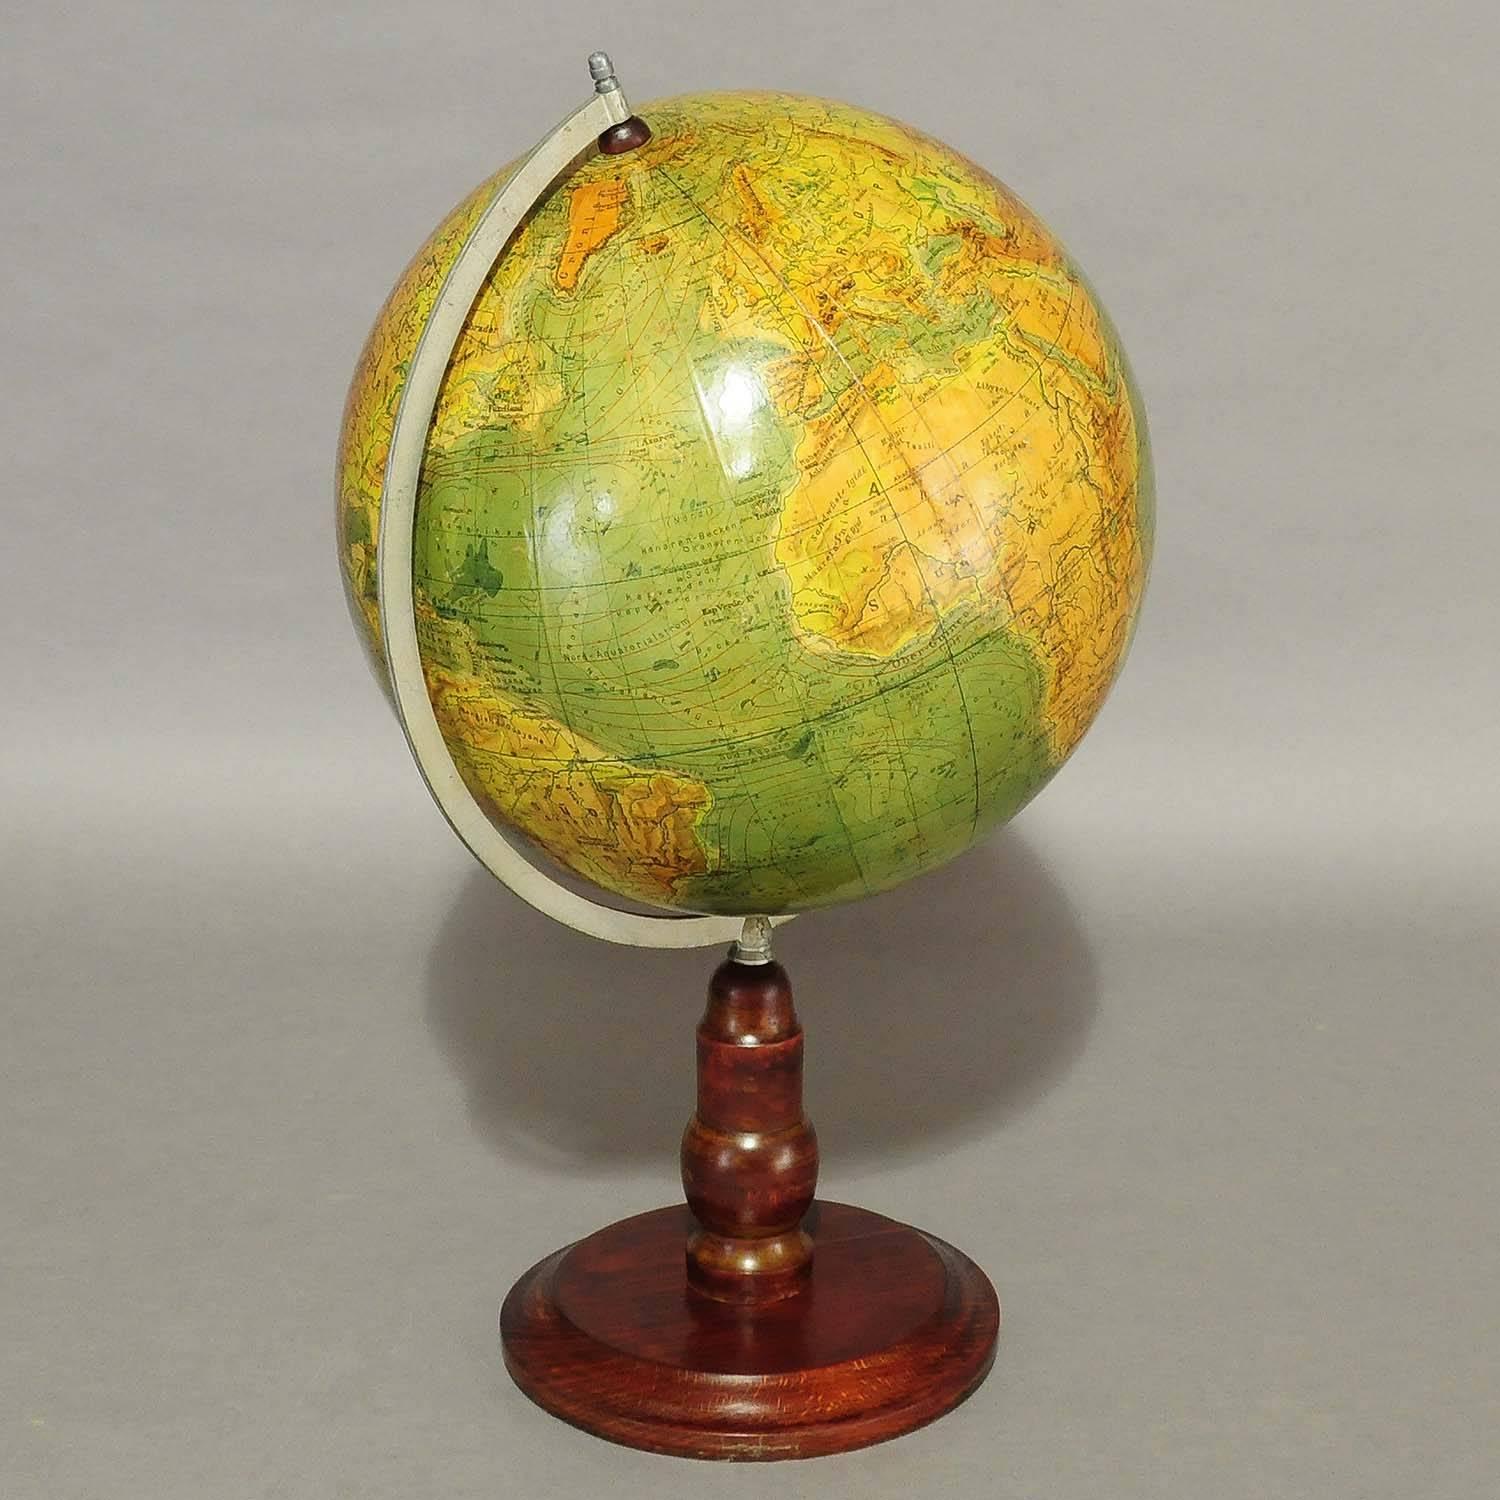 An antique physical earth globe with a wonderful patina. Edited by Prof. Dr. Artur Krause and published by Paul Raeth, Leipzig 1936. Used as teaching material in German schools. Good condition, age-related traces of usage.